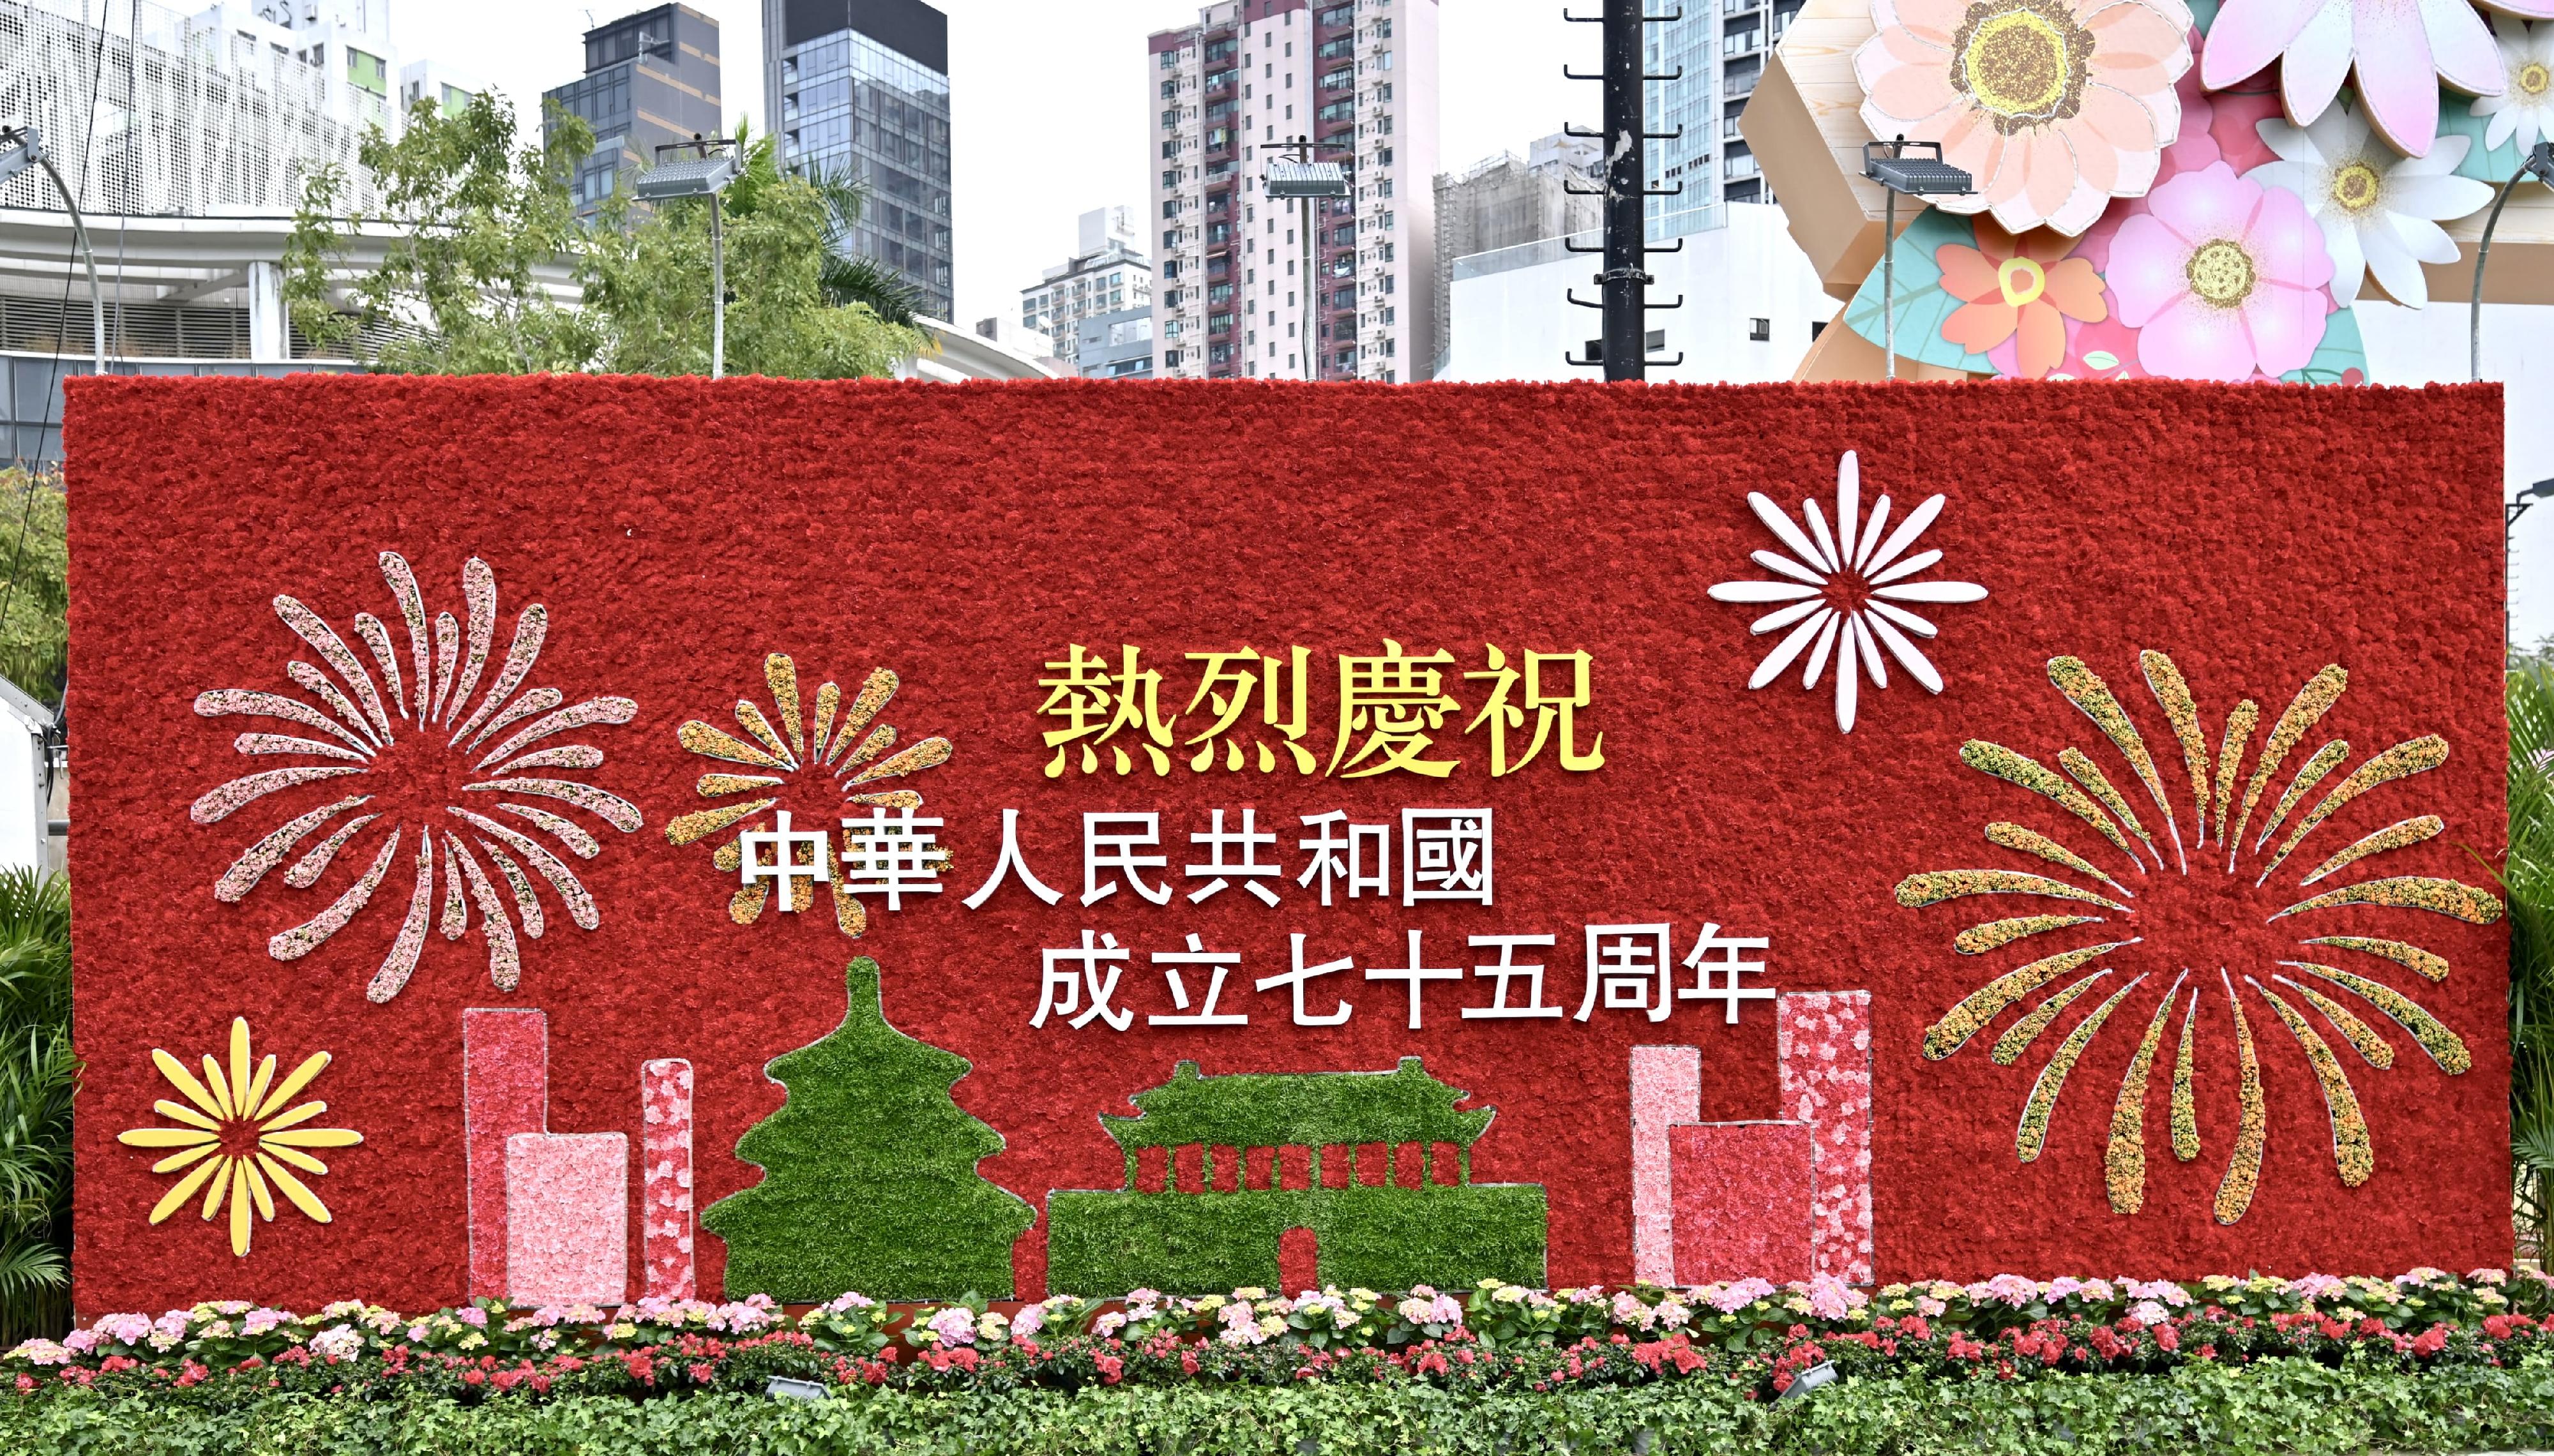 The annual Hong Kong Flower Show extravaganza opened at Victoria Park today (March 15) with some 420 000 flowers on display, including about 40 000 angelonias as the theme flower. To celebrate the 75th anniversary of the founding of the People's Republic of China, a thematic floral wall adorned with carnations is mounted at the Hing Fat Street entrance of the flower show. 
